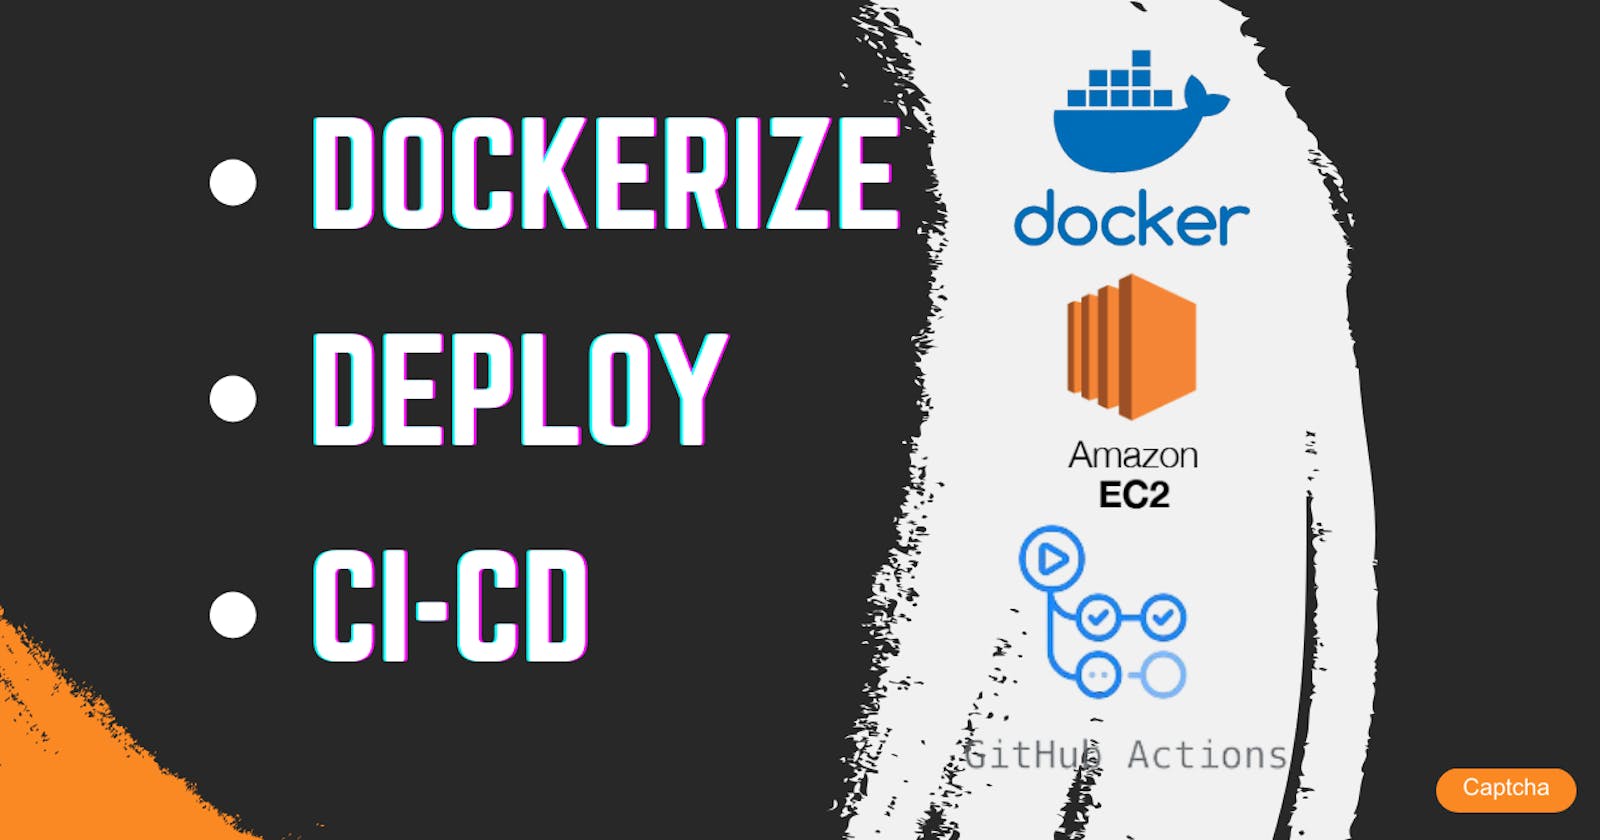 How to Dockerize your app and deploy to Amazon EC2 with CI-CD using GitHub Actions